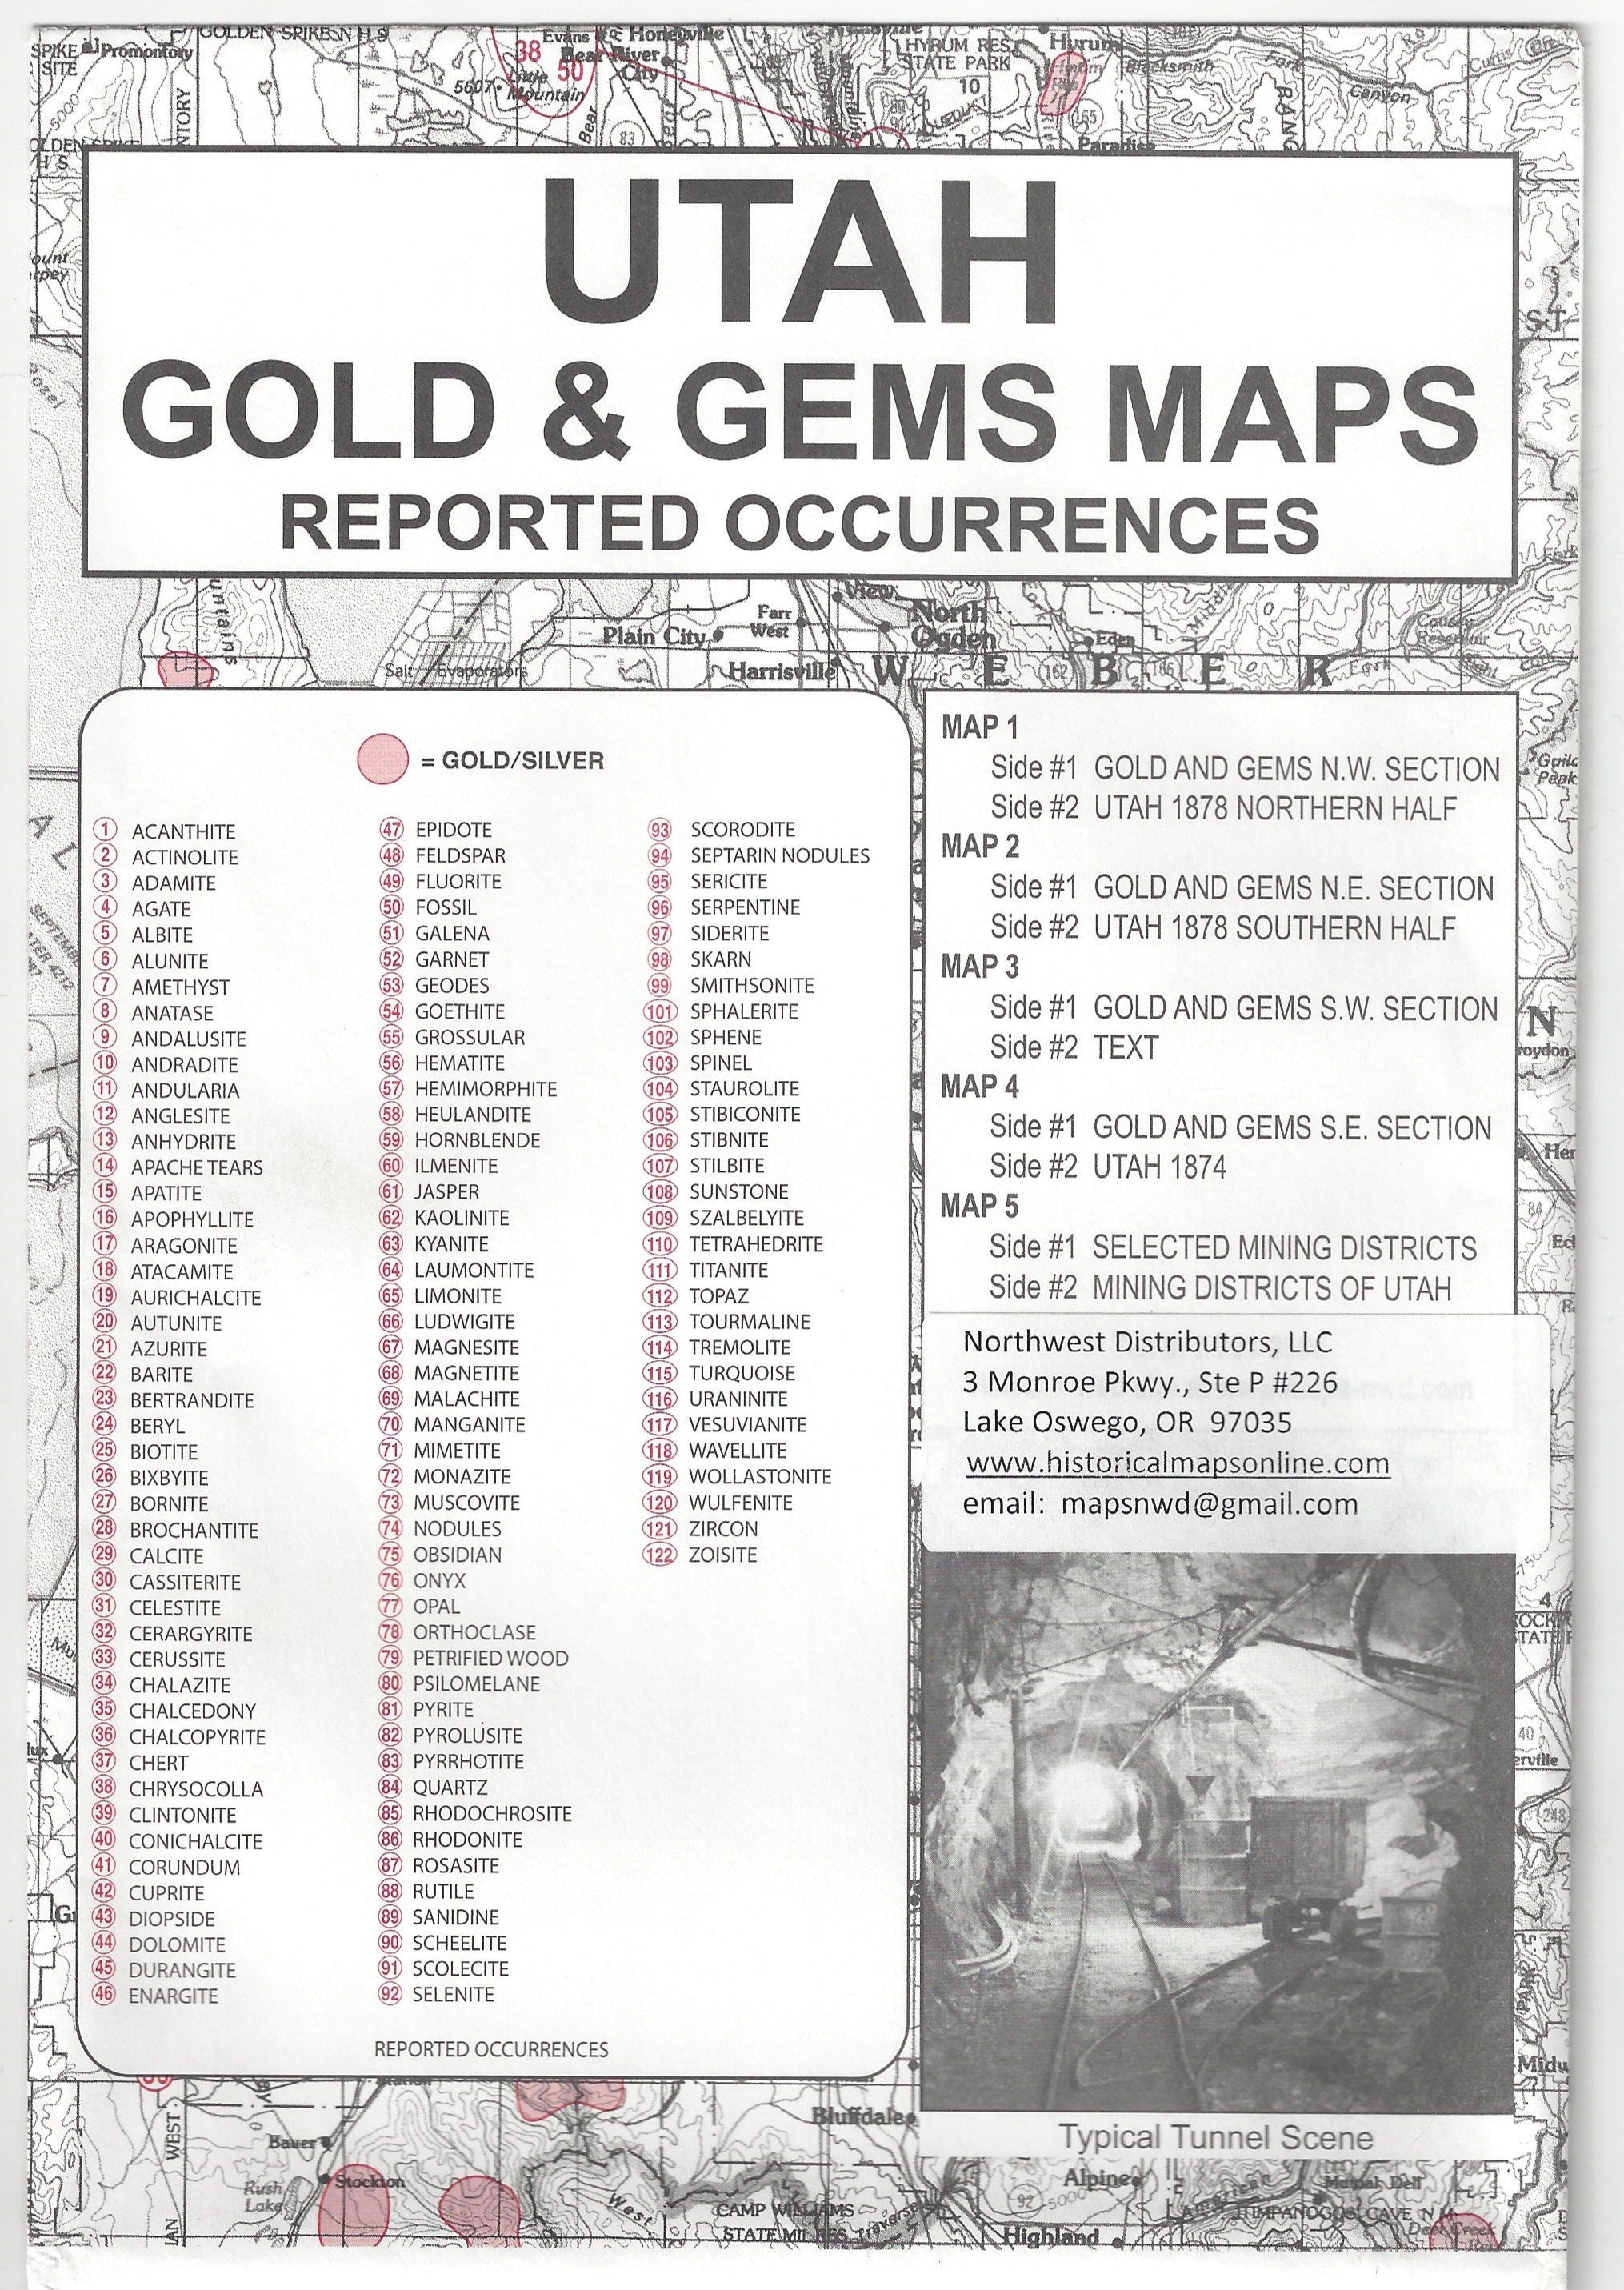 Utah Gold and Gems Maps Then and Now